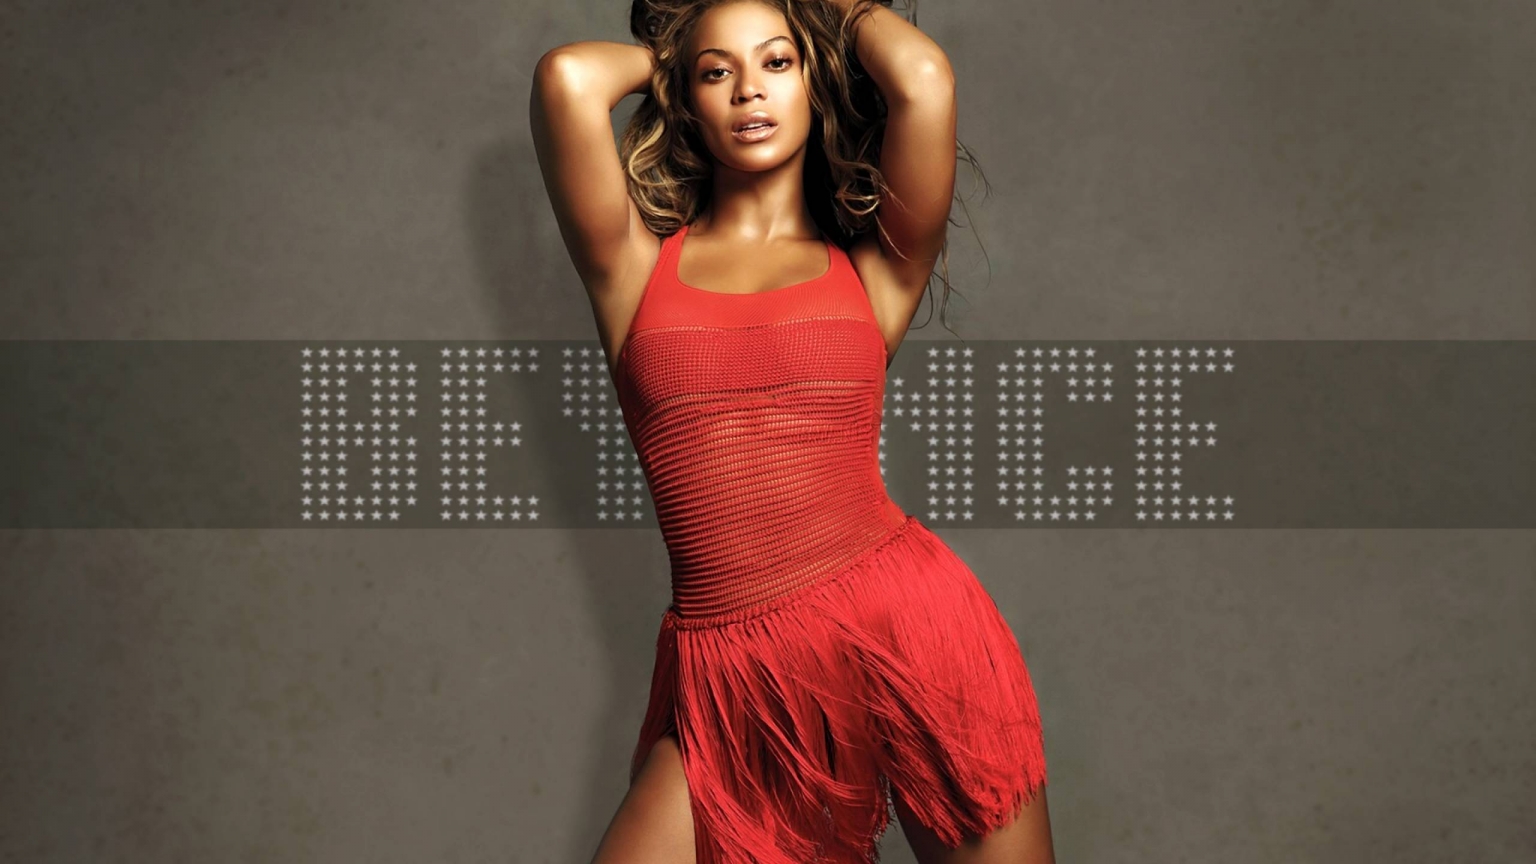 Beautiful Beyonce for 1536 x 864 HDTV resolution